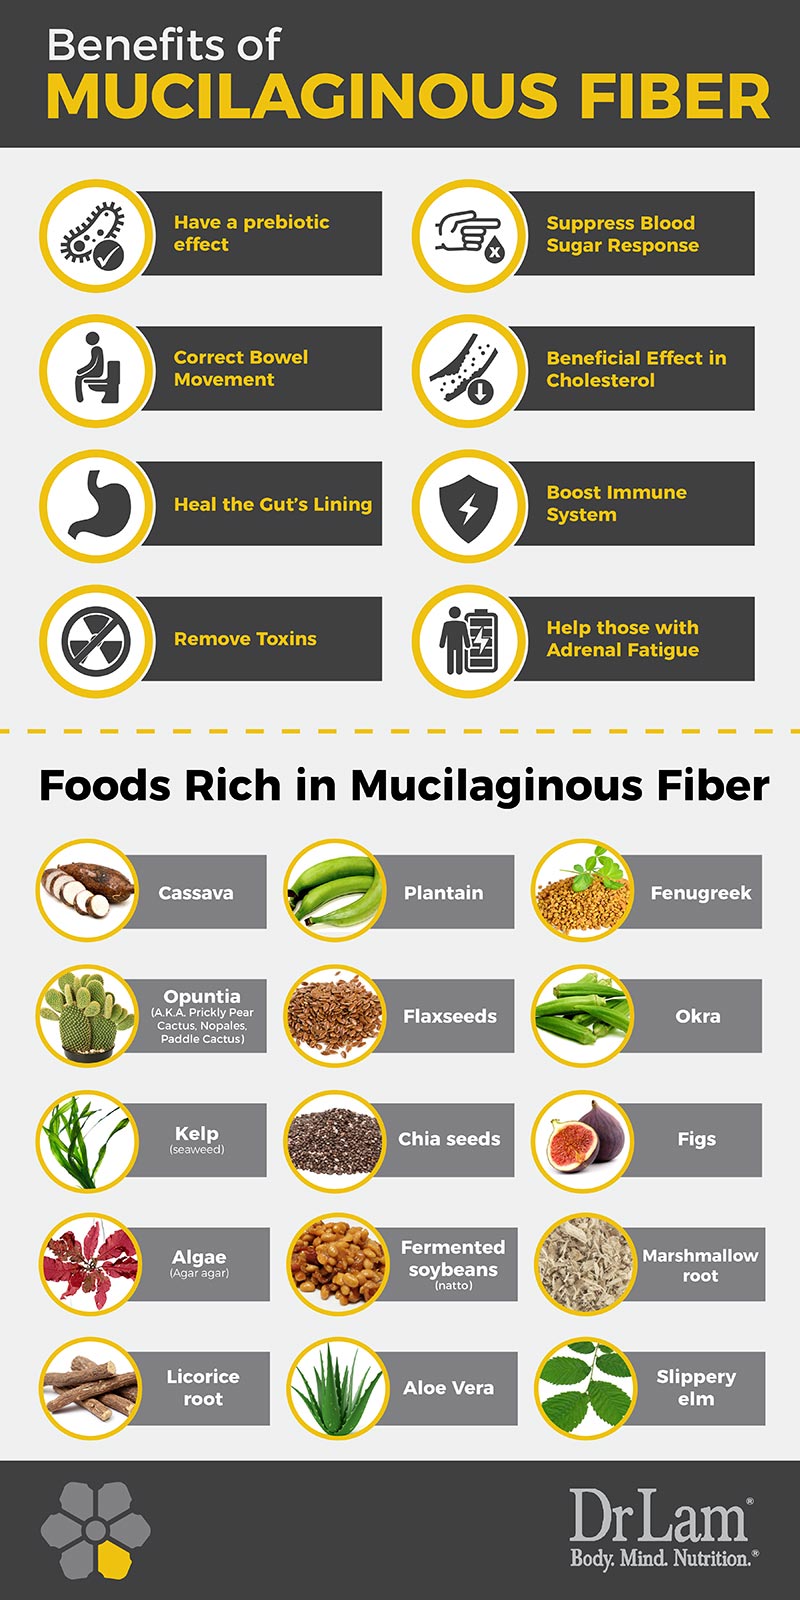 Check out this easy to understand infographic about the benefits of mucilaginous fiber